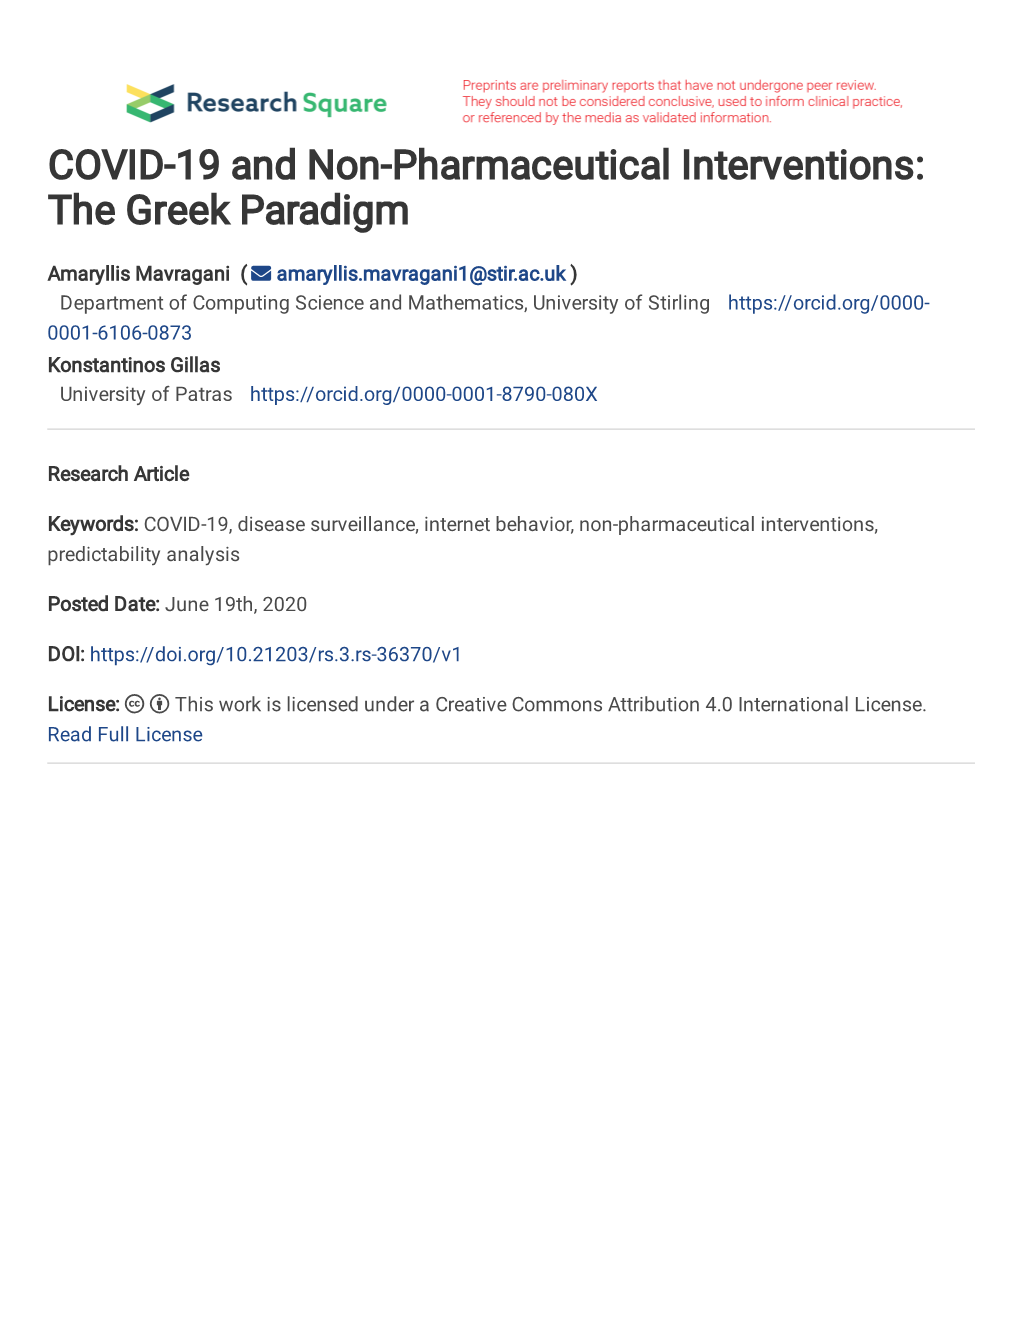 COVID-19 and Non-Pharmaceutical Interventions: the Greek Paradigm